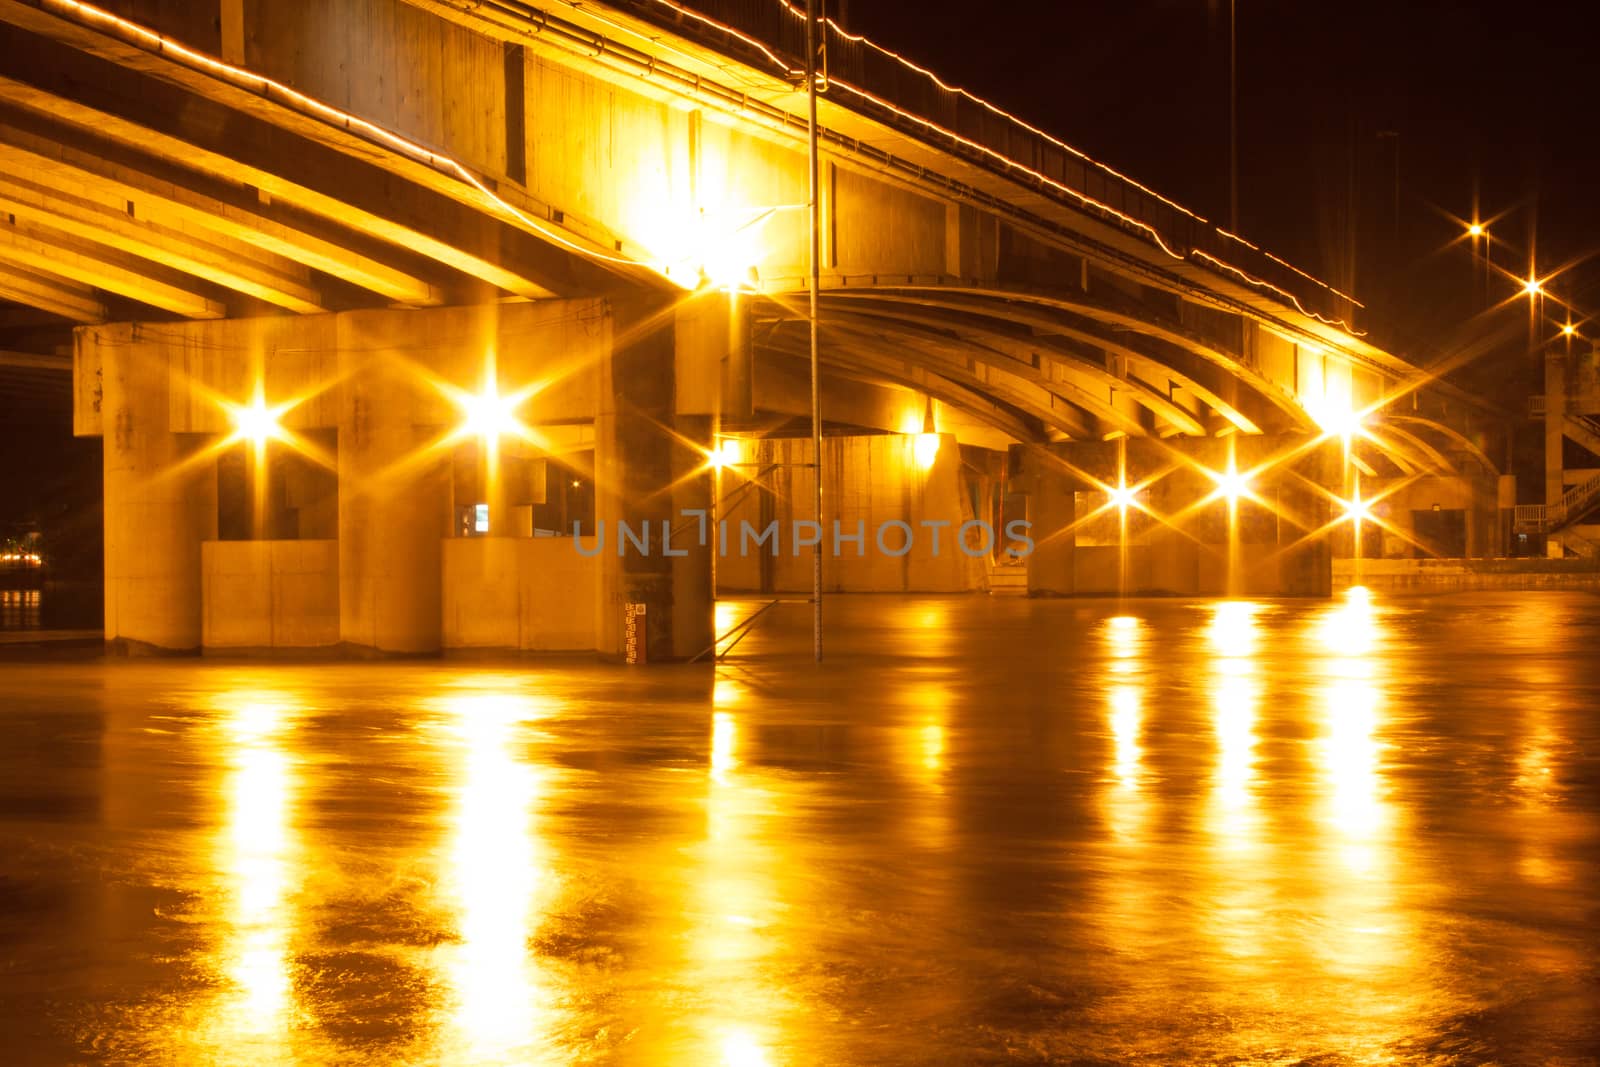 The light at night shines under the bridge over the river.